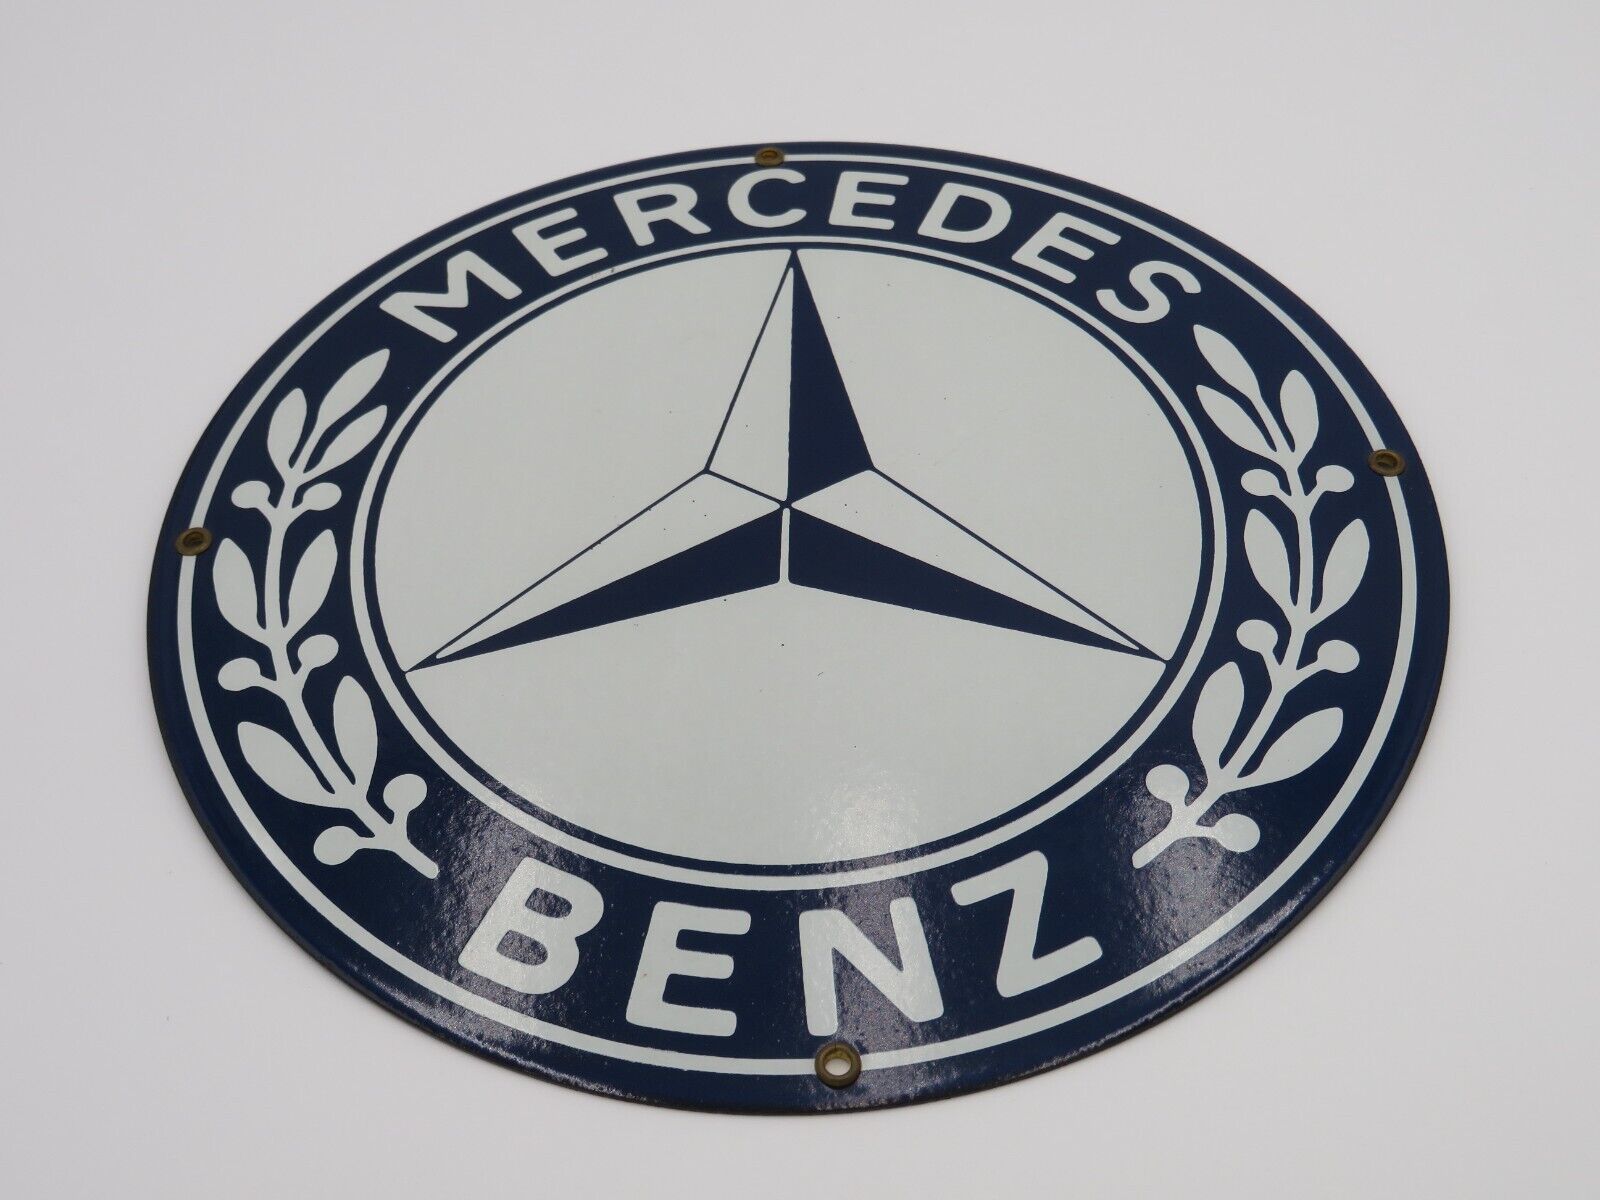 Vintage 1970s Mercedes Benz Heavyweight Metal Sign - Approx 10.6 inches in diam.